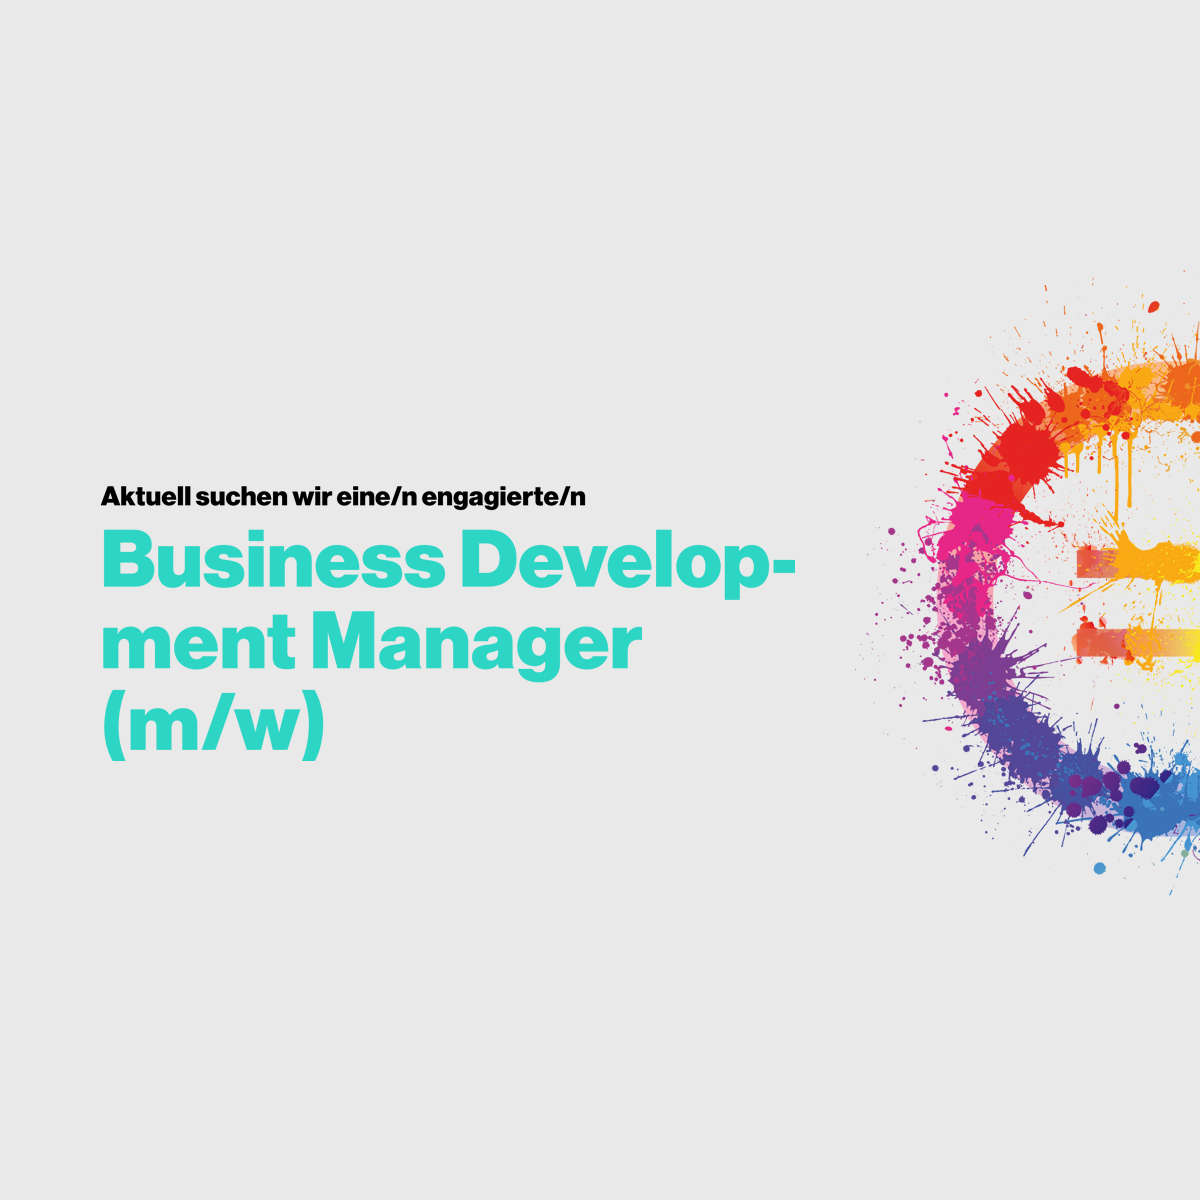 Business Development Manager (m/w)